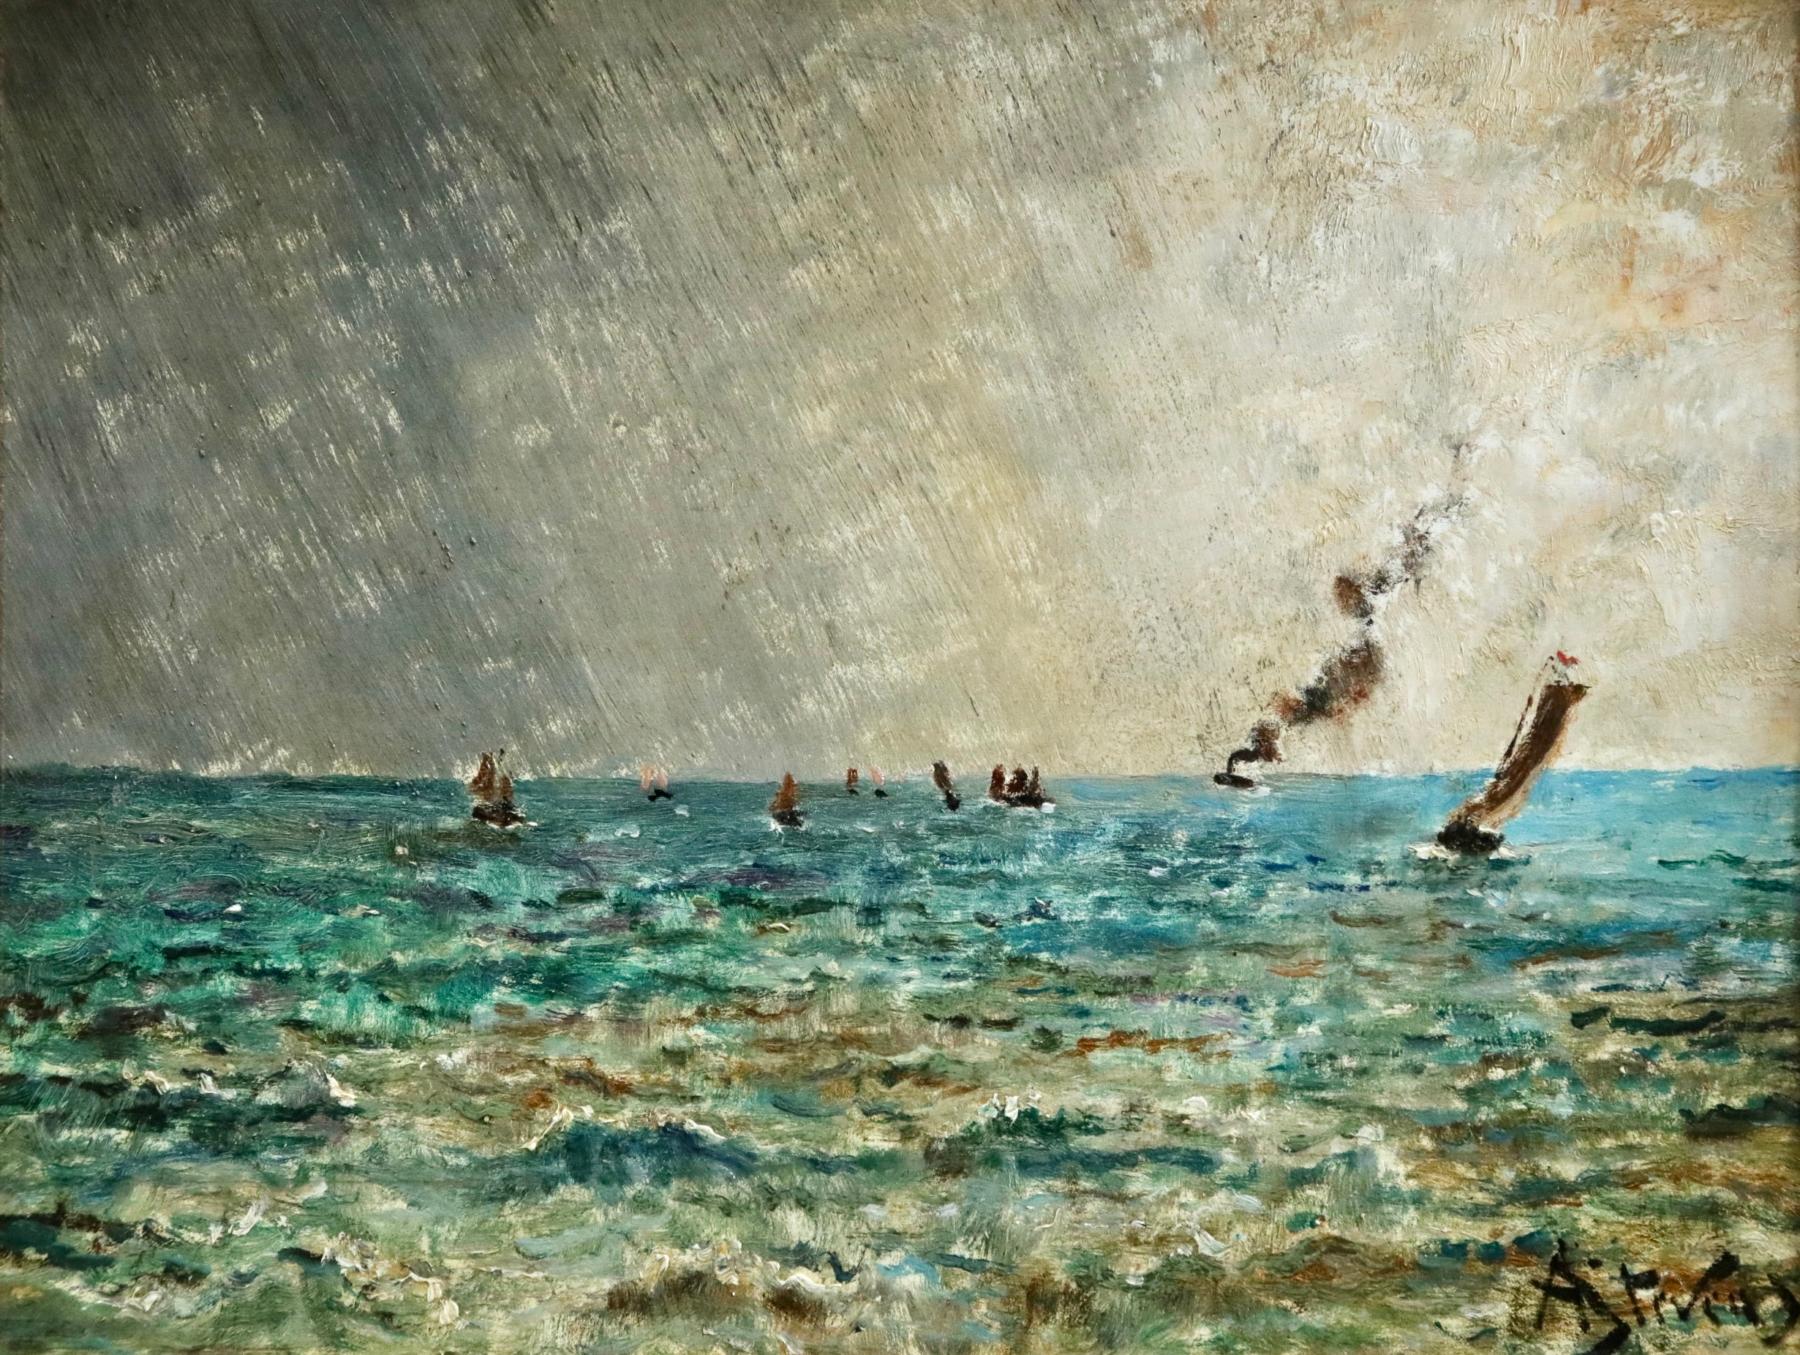 Steamers off the Coast - 19th Century Oil, Boats in Seascape by Alfred Stevens - Painting by Alfred Émile Léopold Stevens